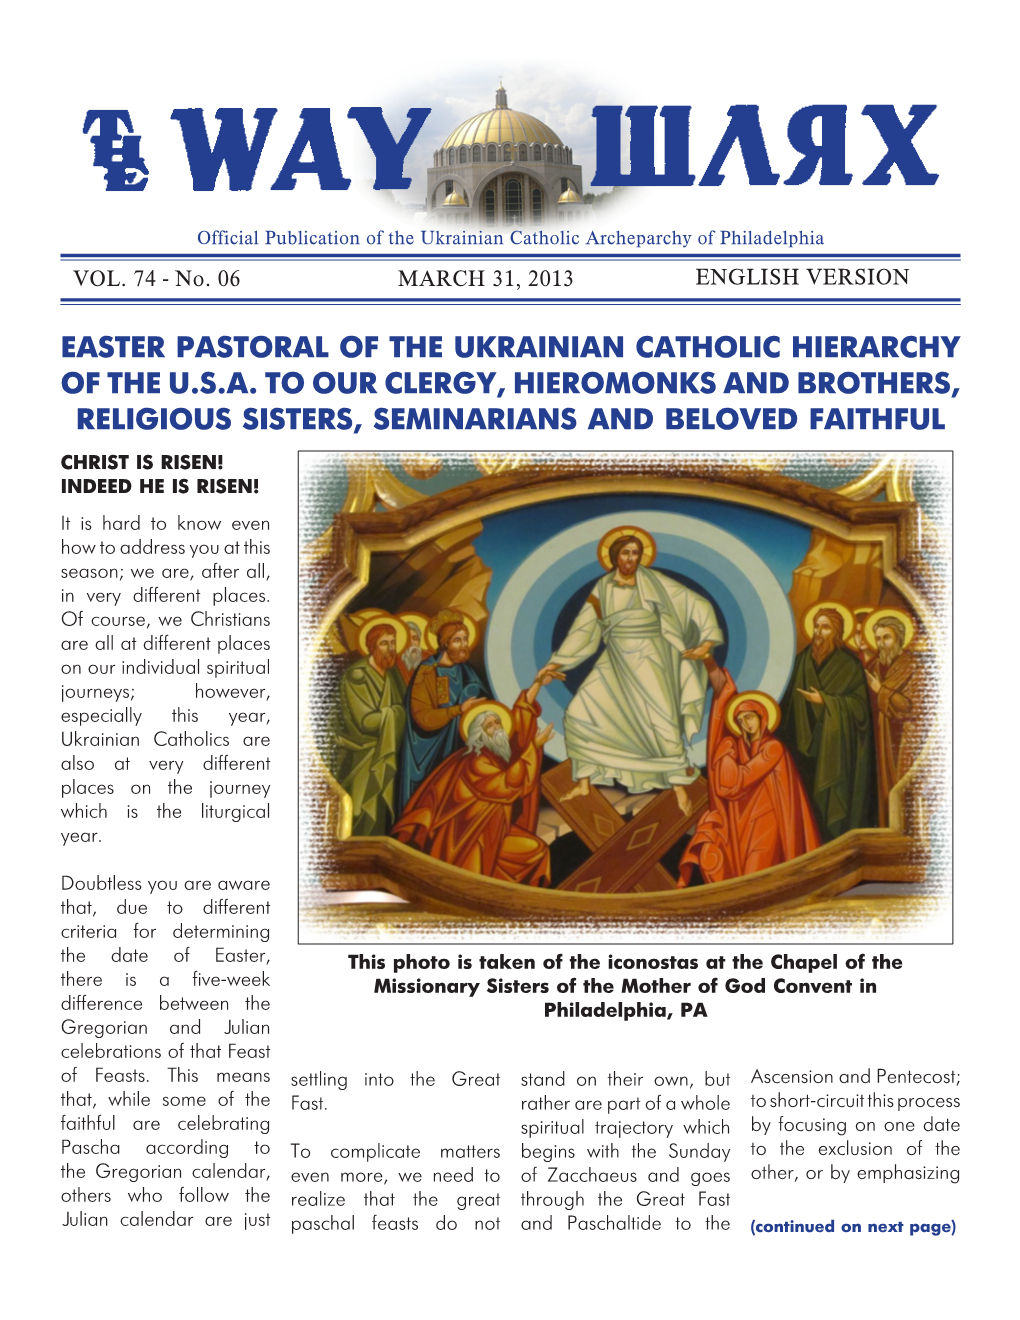 Easter Pastoral of the Ukrainian Catholic Hierarchy of the U.S.A. to Our